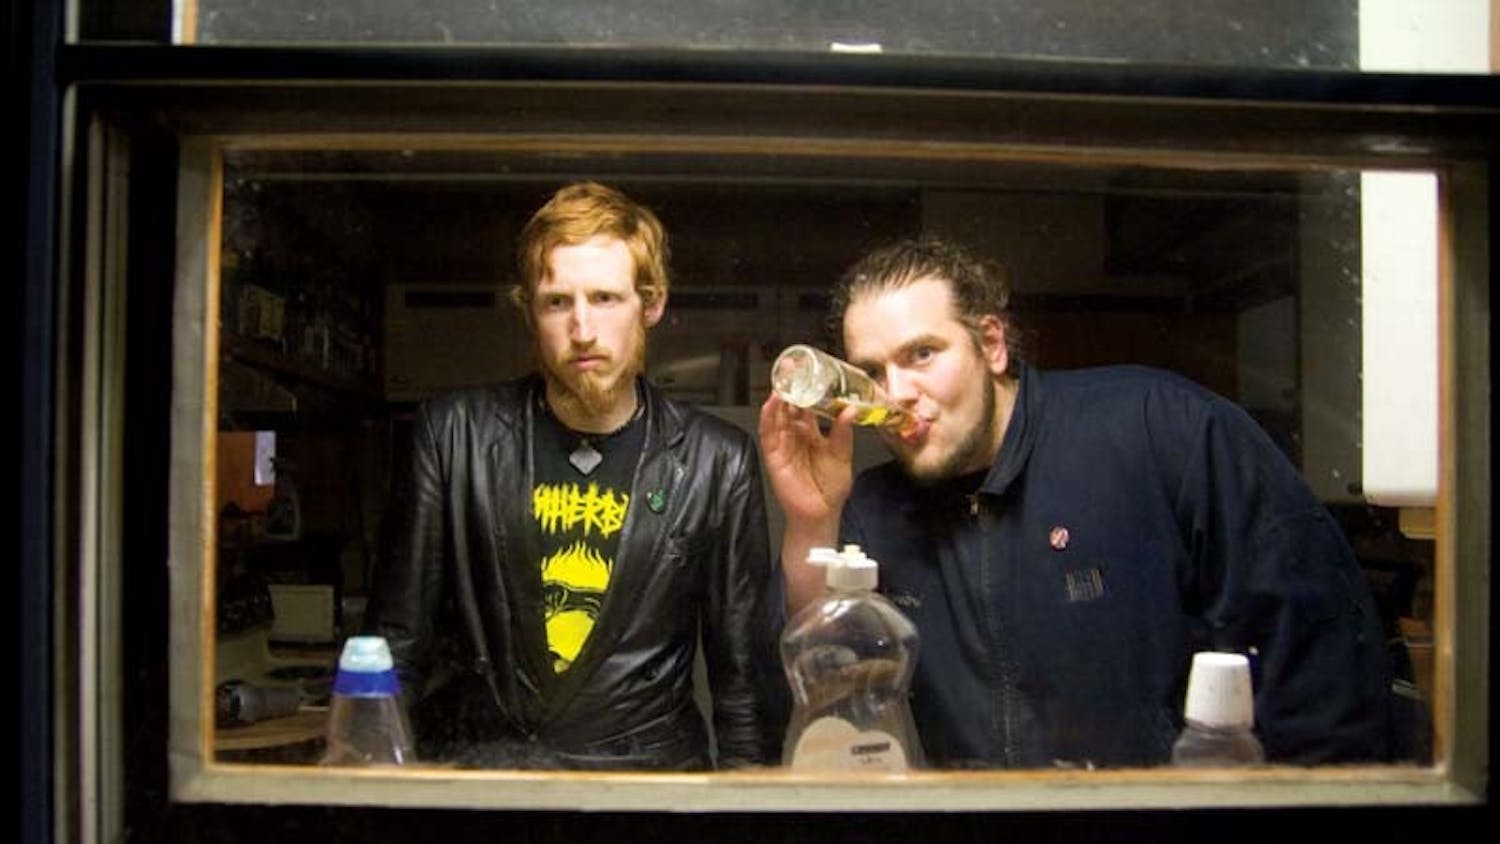 Grand Buffet (Jackson O'Connel-Barlow and Jarrod Weeks) prepare mentally and alcoholicly for their concert April 4 in a Bloomington basement.